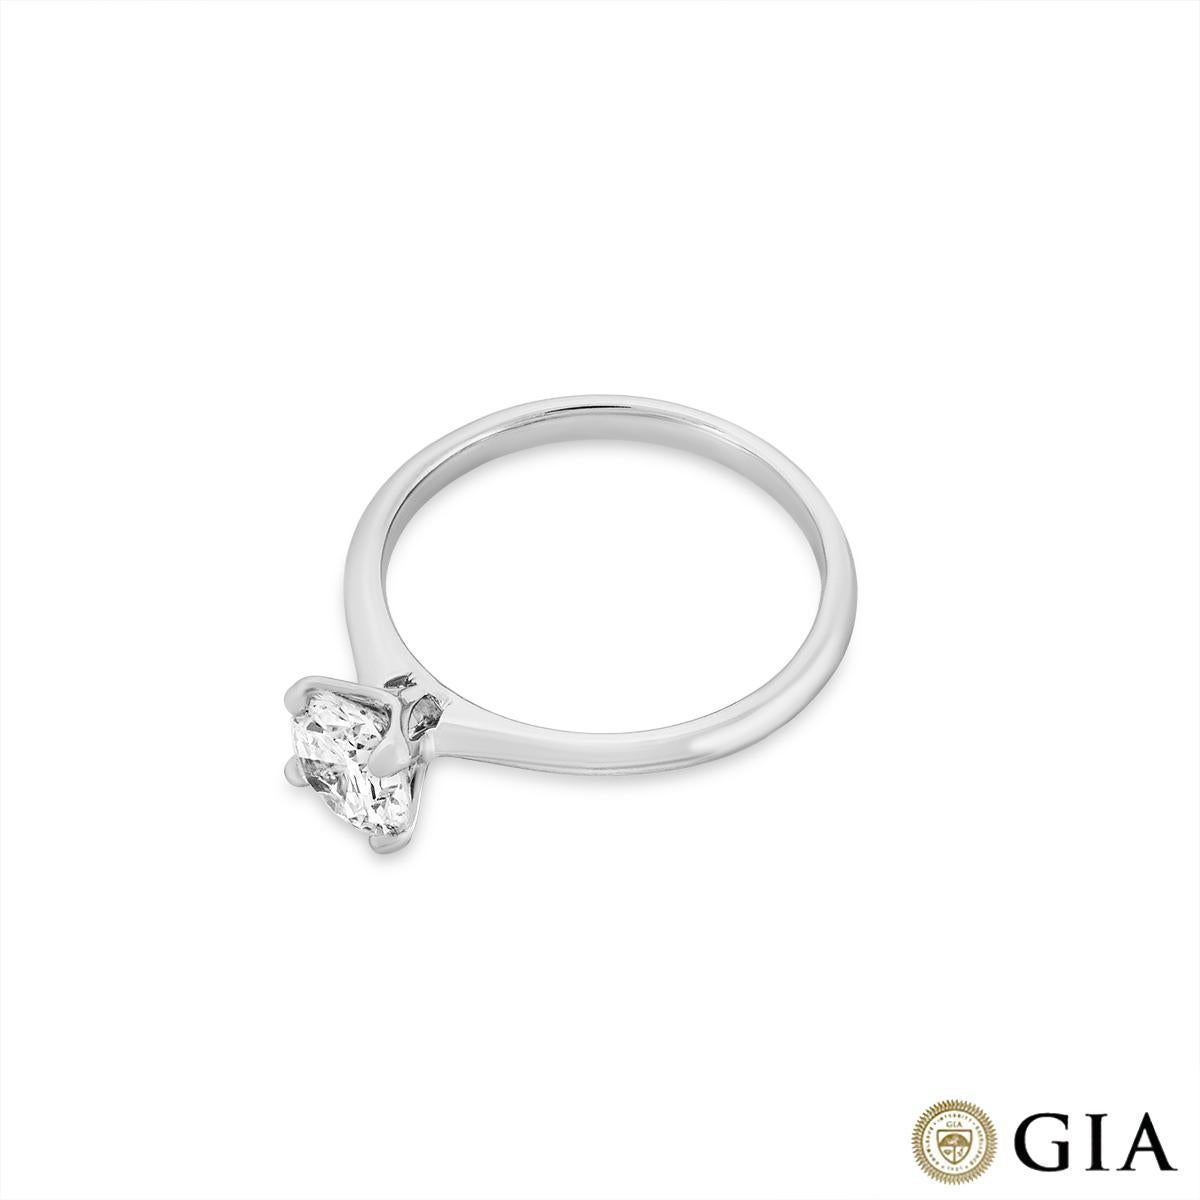 GIA Certified White Gold Round Brilliant Cut Diamond Ring 1.10ct G/SI1 In Excellent Condition For Sale In London, GB